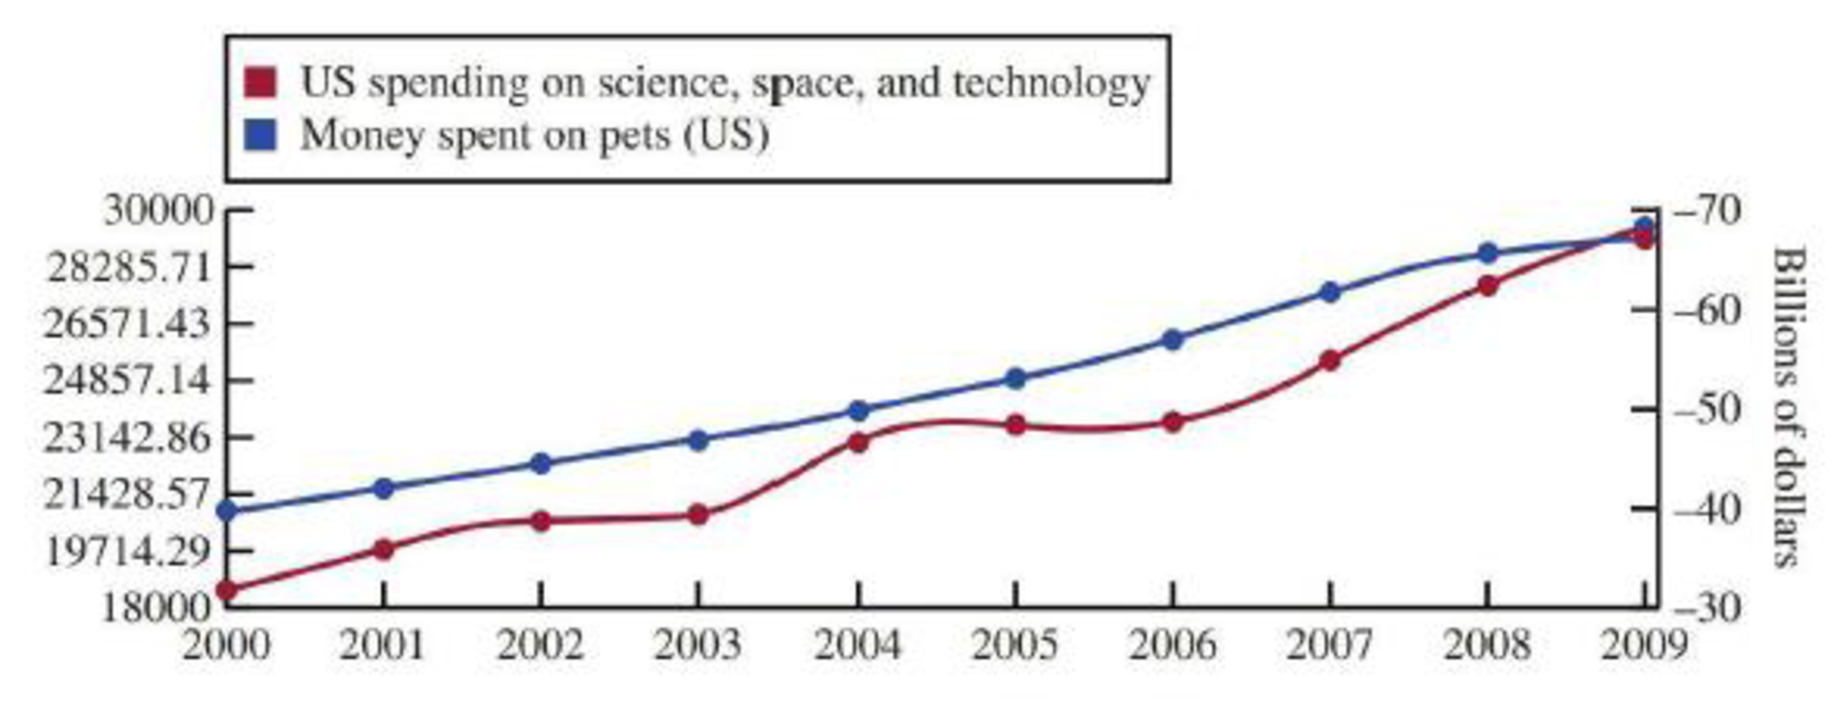 Chapter 5, Problem 6CRE, The amount of money spent each year on science, space, and technology in the United States (in 